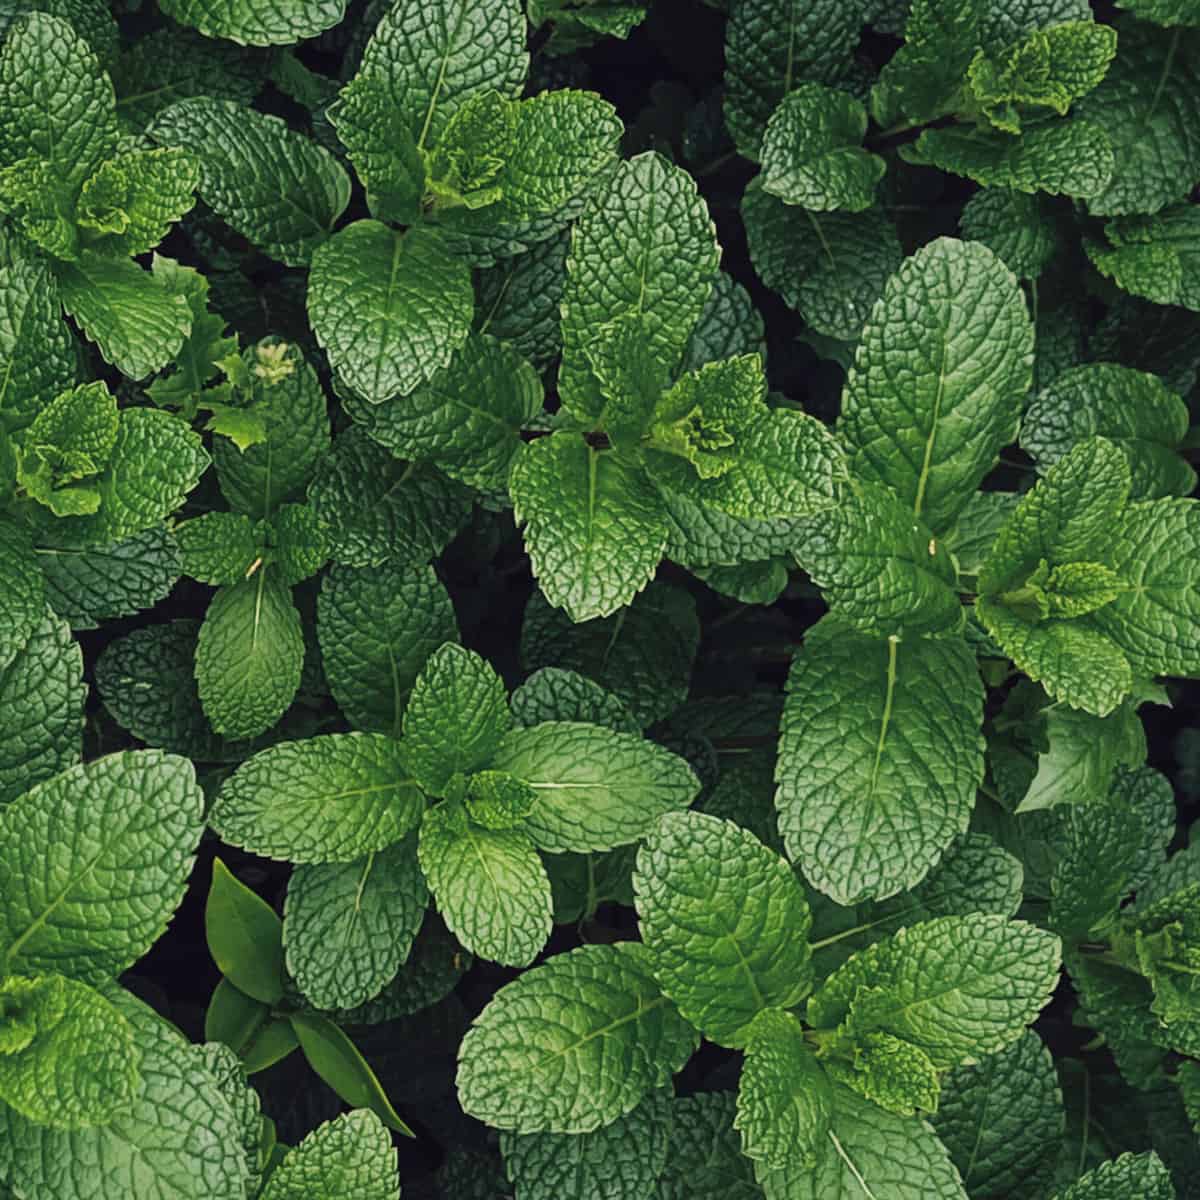 Growing mint from seed or starts to harvest